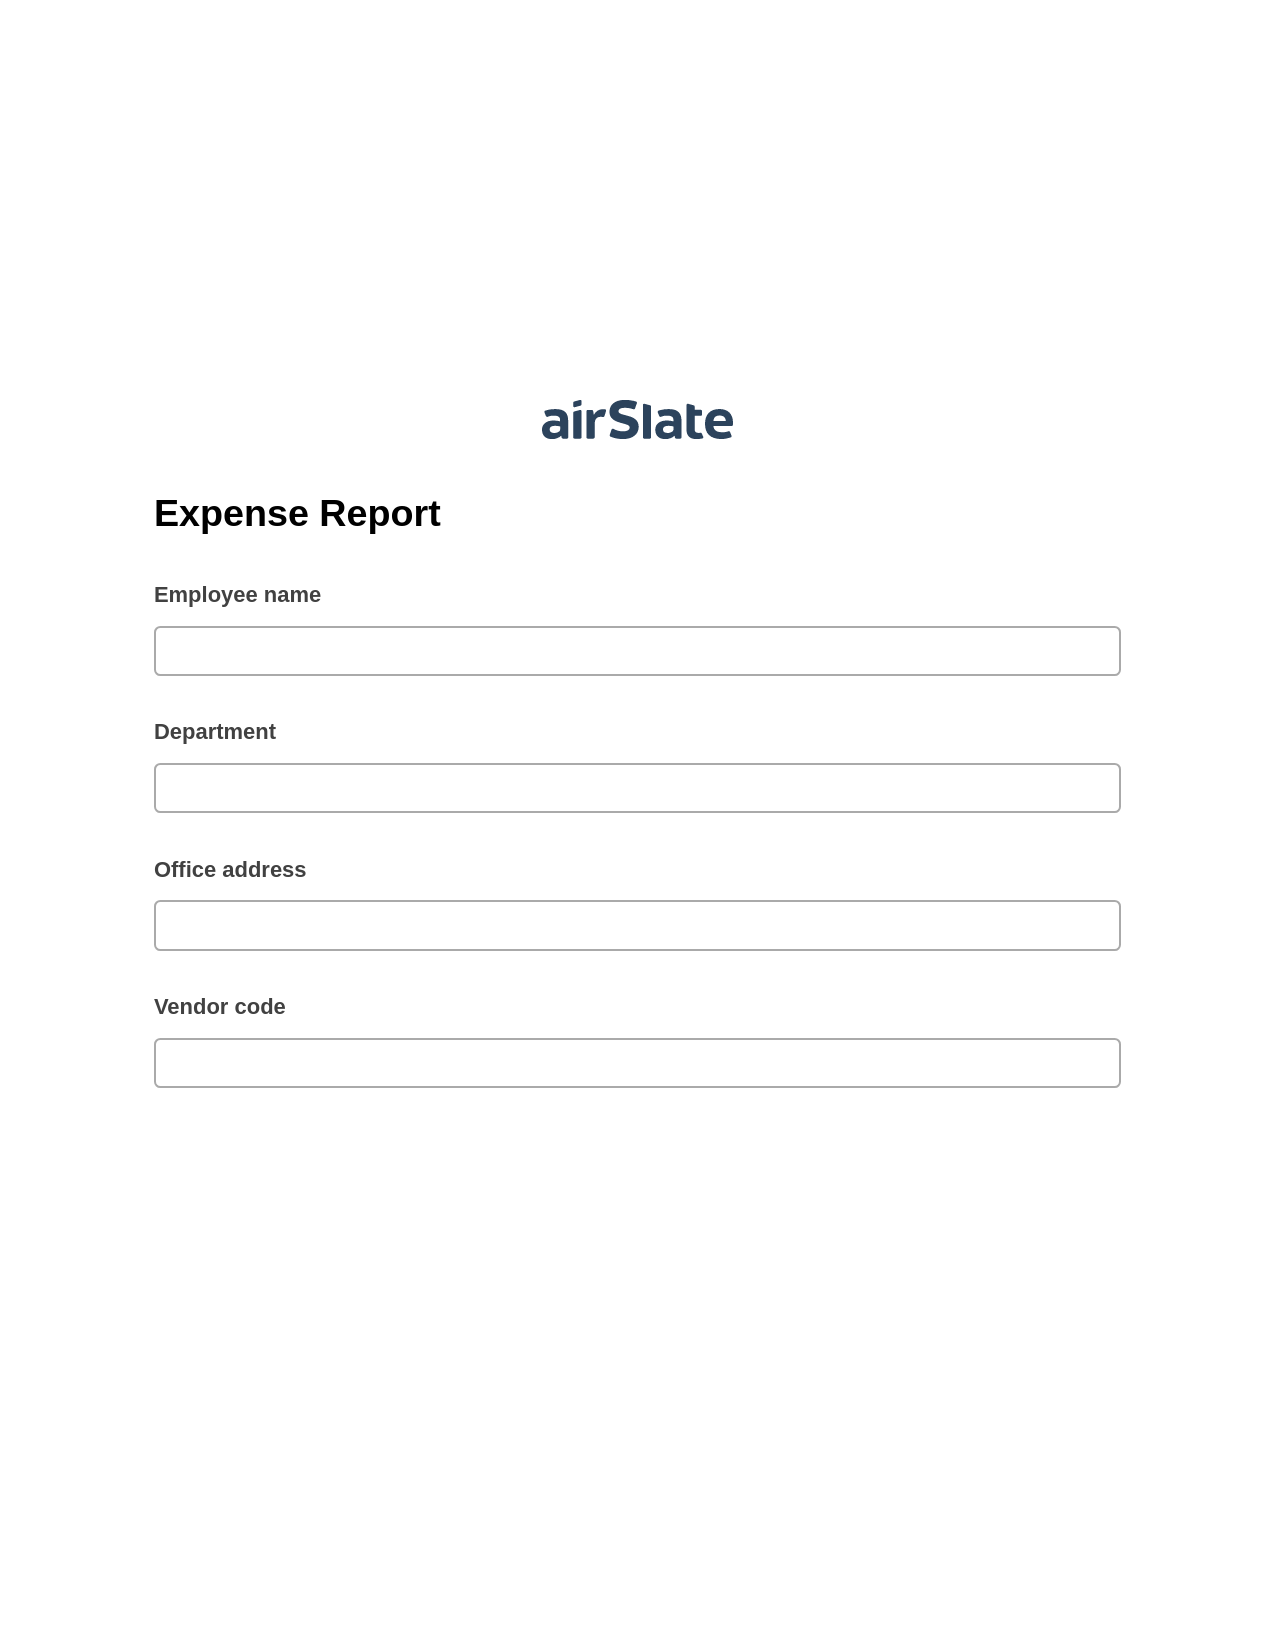 Expense Report Pre-fill from CSV File Bot, Hide Signatures Bot, Export to MySQL Bot